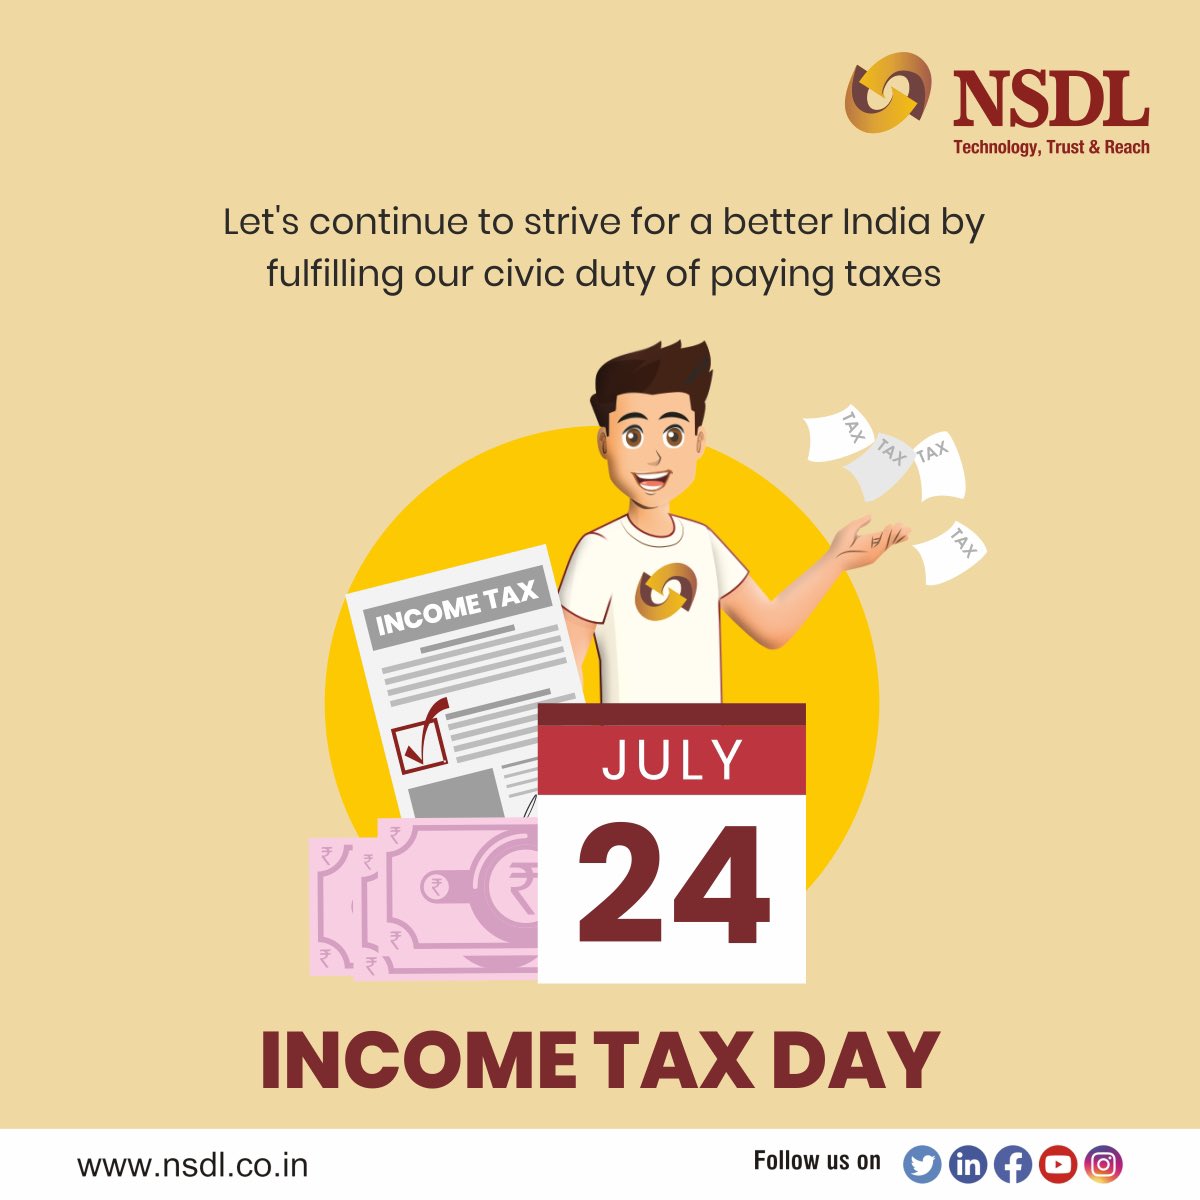 Wishing you all a Happy Income Tax Day! Let's stay compliant, contribute to the nation's growth, and build a bright future together.

#IncomeTaxDay #PayYourTaxes #TaxCompliance #IncomeTax2023 #FinancialResponsibility #TaxPayerPride #BuildingTheNation #ContributeToGrowth #nsdl…